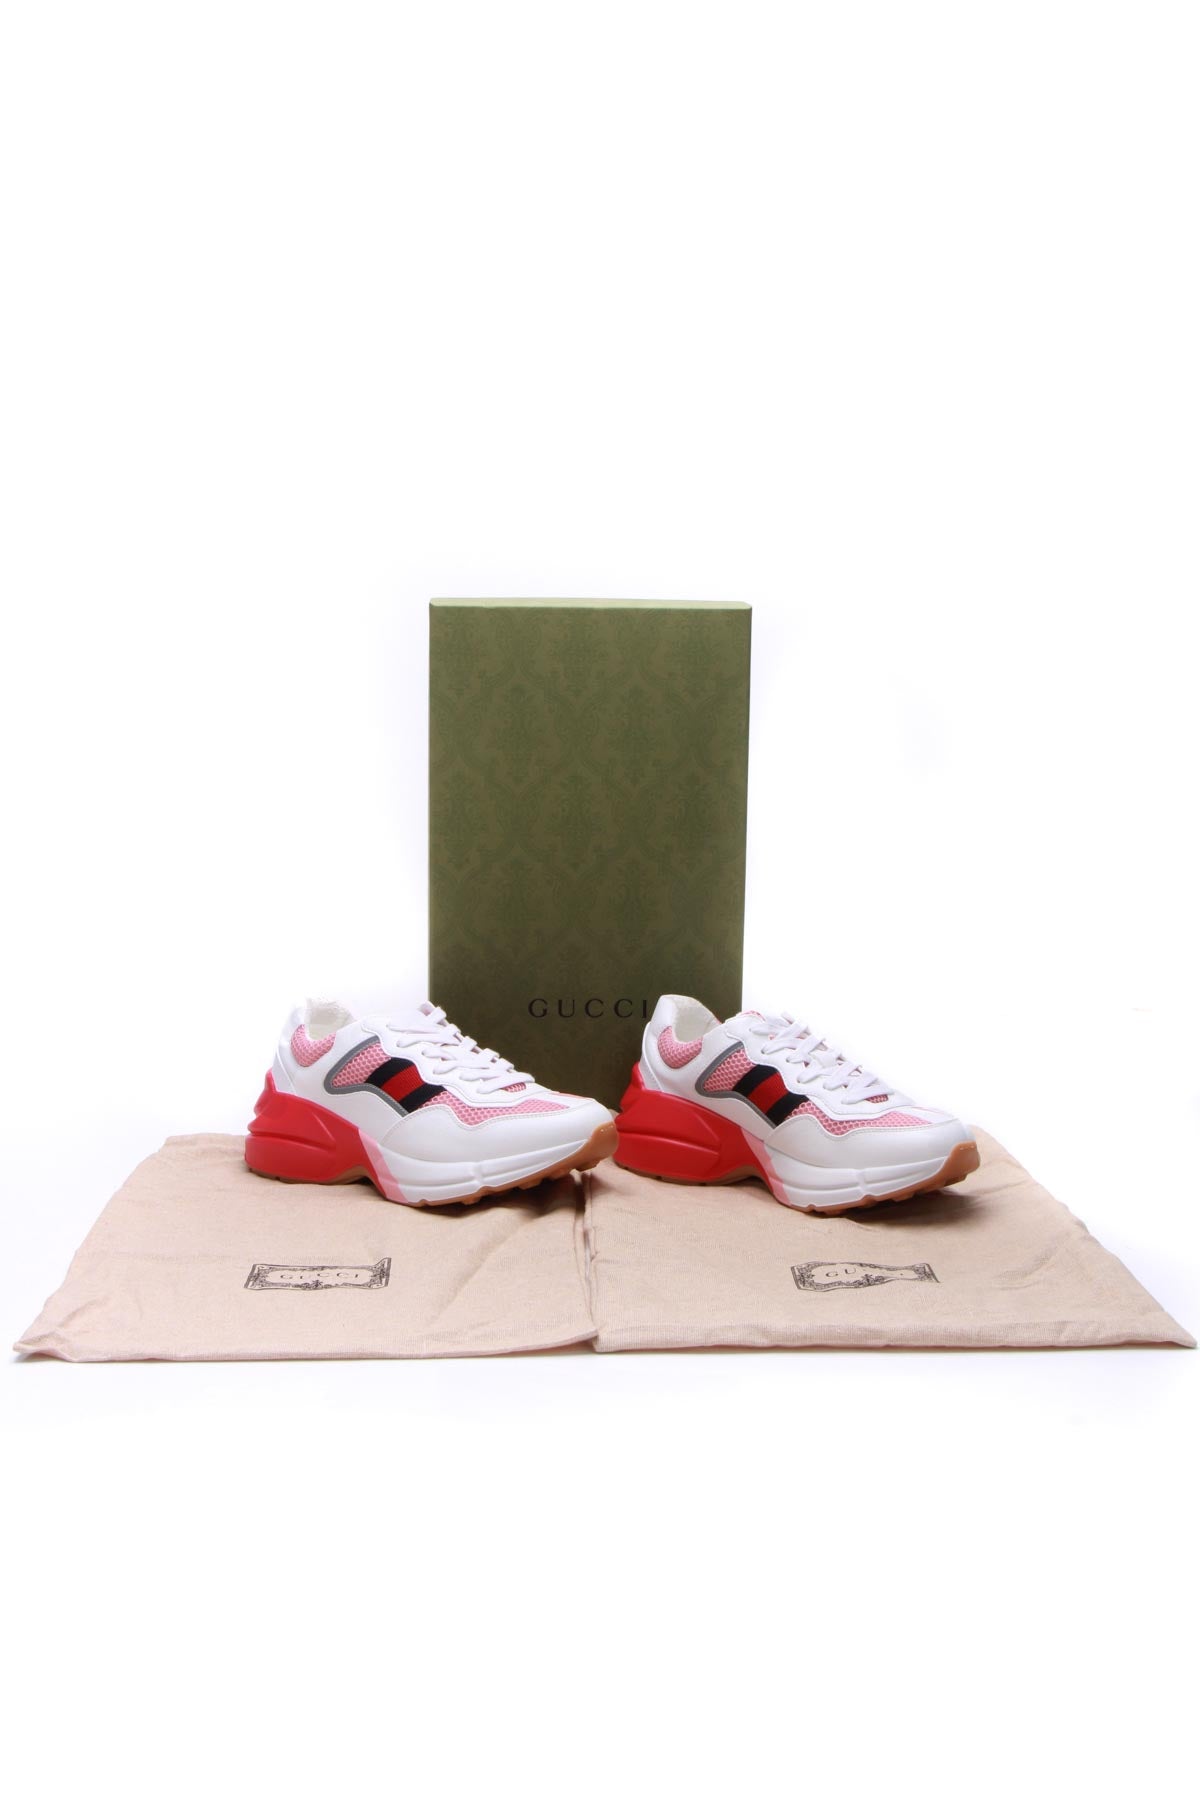 GG Gucci Ace Empty Shoes Box With 2 New Gucci GG Dust Bags